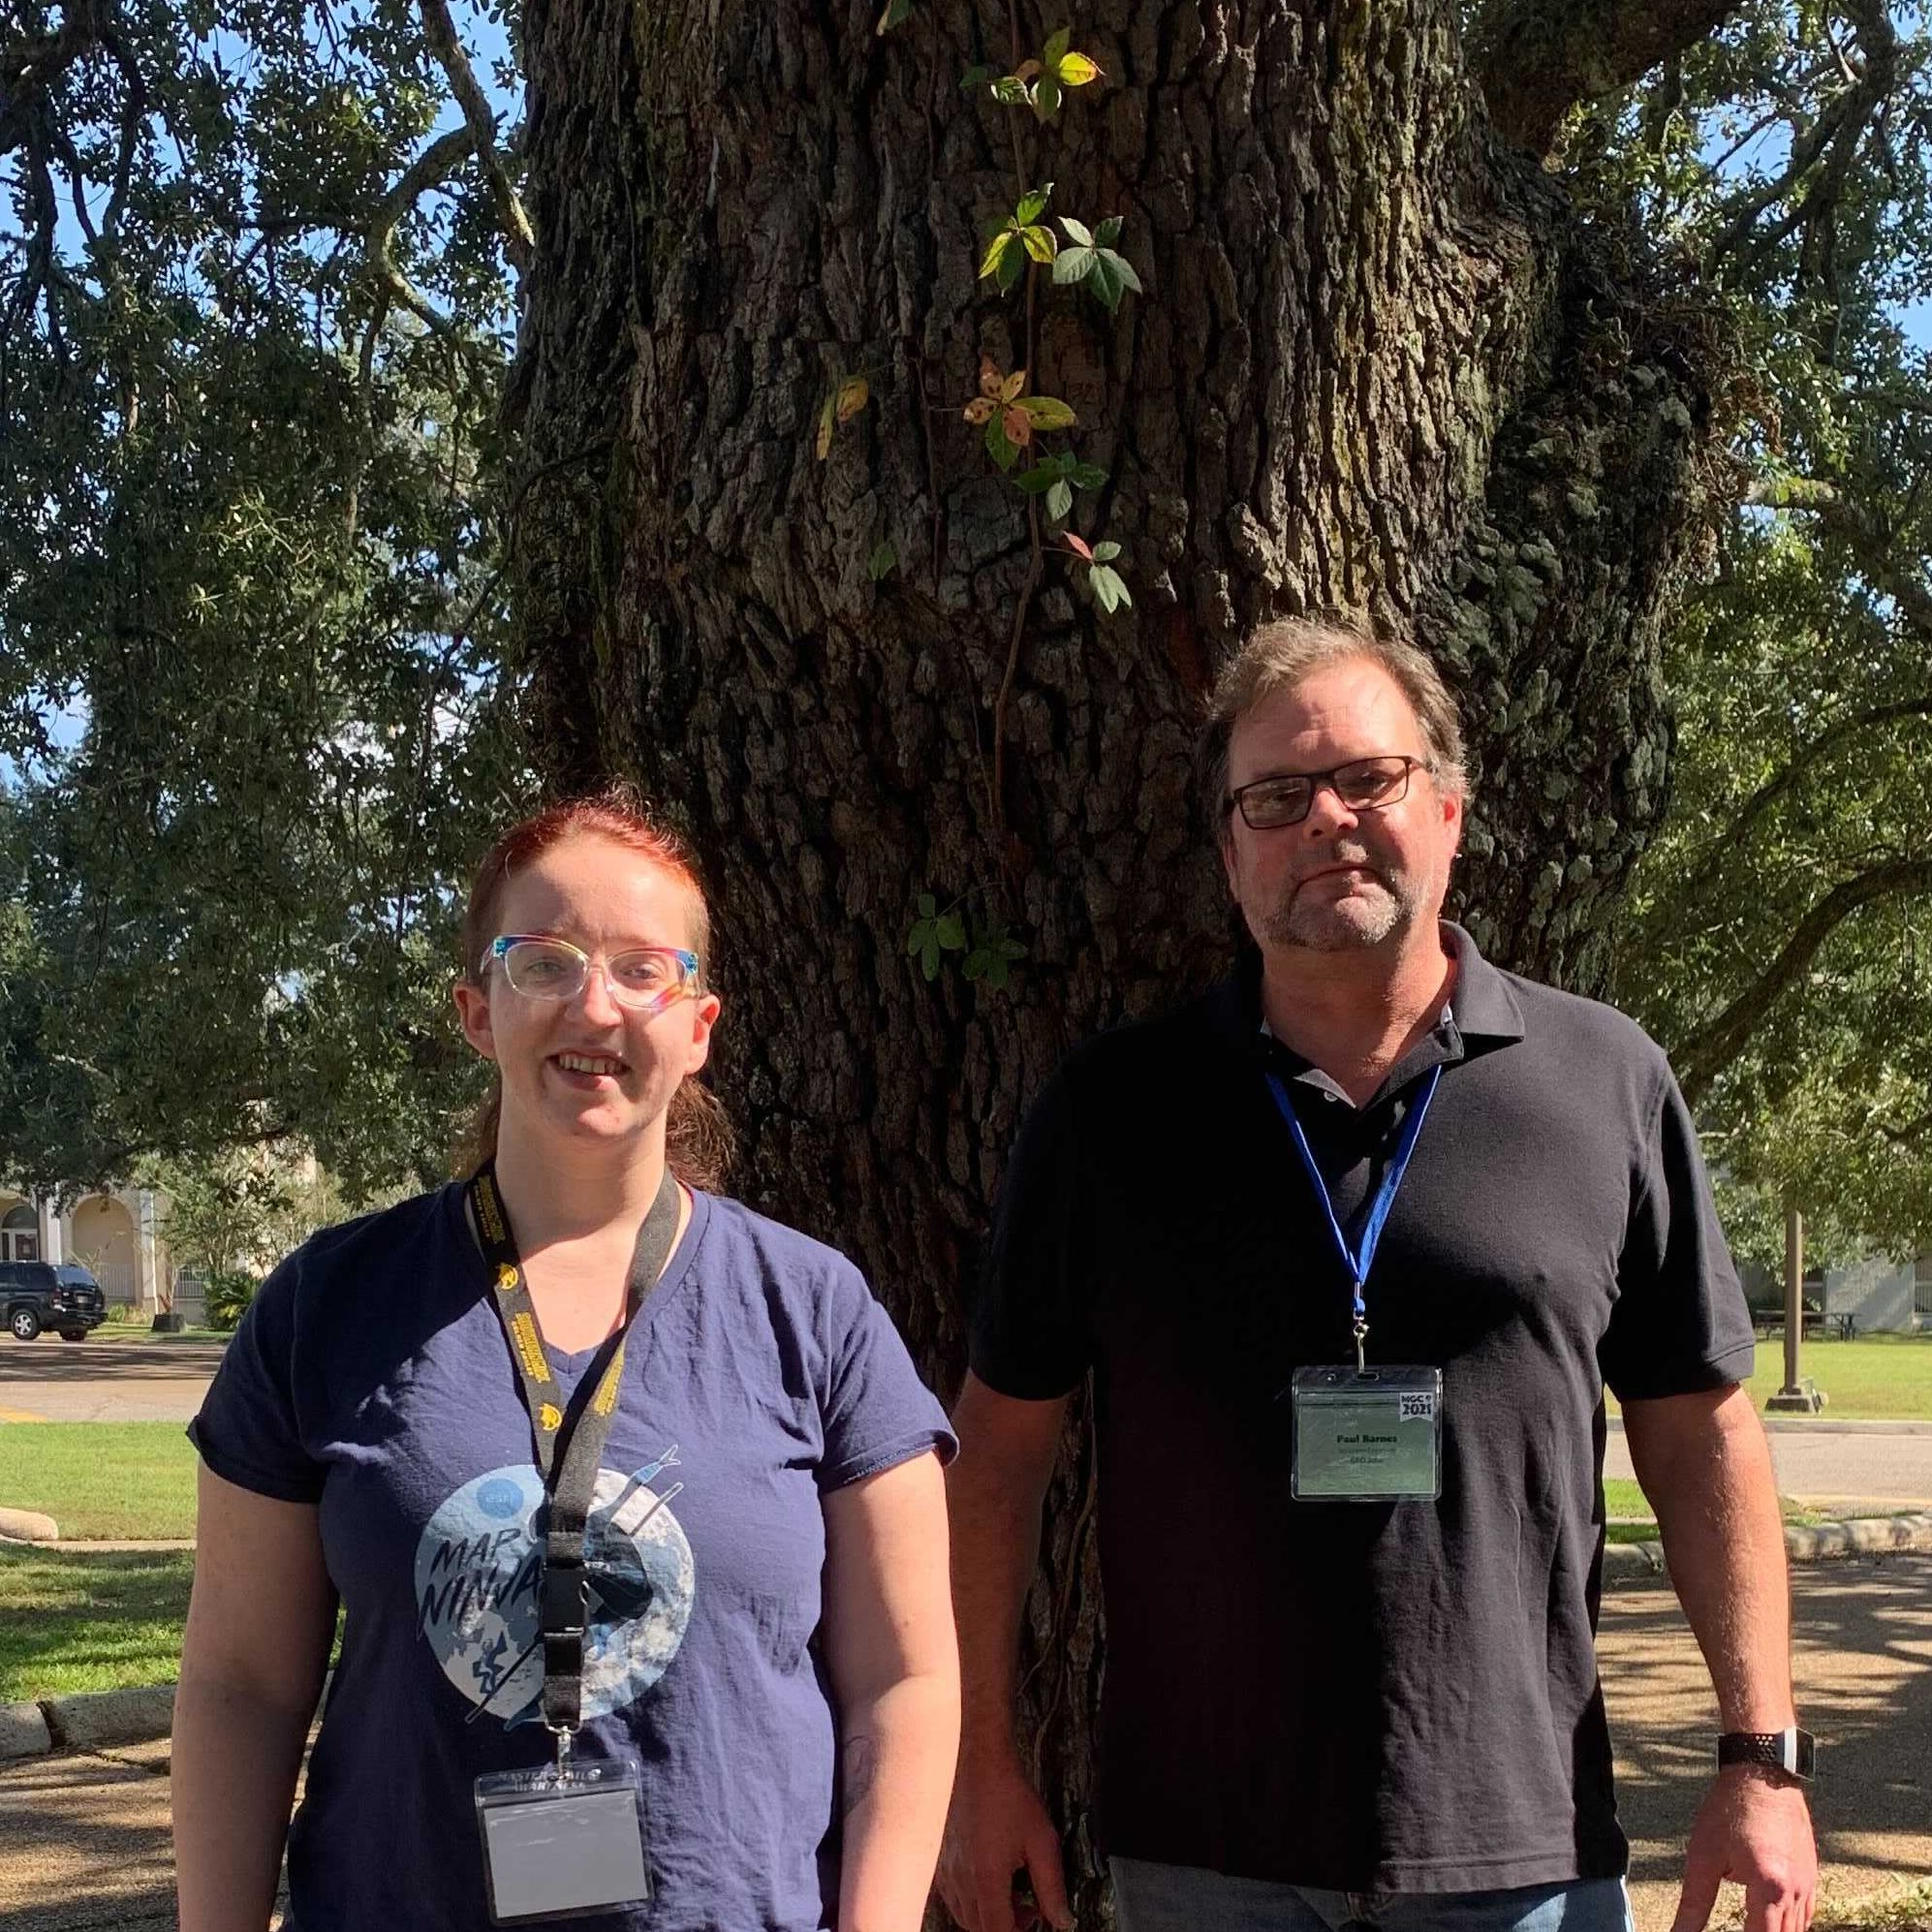 Courtney Menikheim and Paul Barnes stand before an oak tree at the Mississippi Geospatial Conference. Courtney is wearing glasses and a shirt that says "Map Ninja". Paul Barnes is wearing glasses and a black polo. They have just been re-elected as MAST's Secretary and Treasurer, respectively.